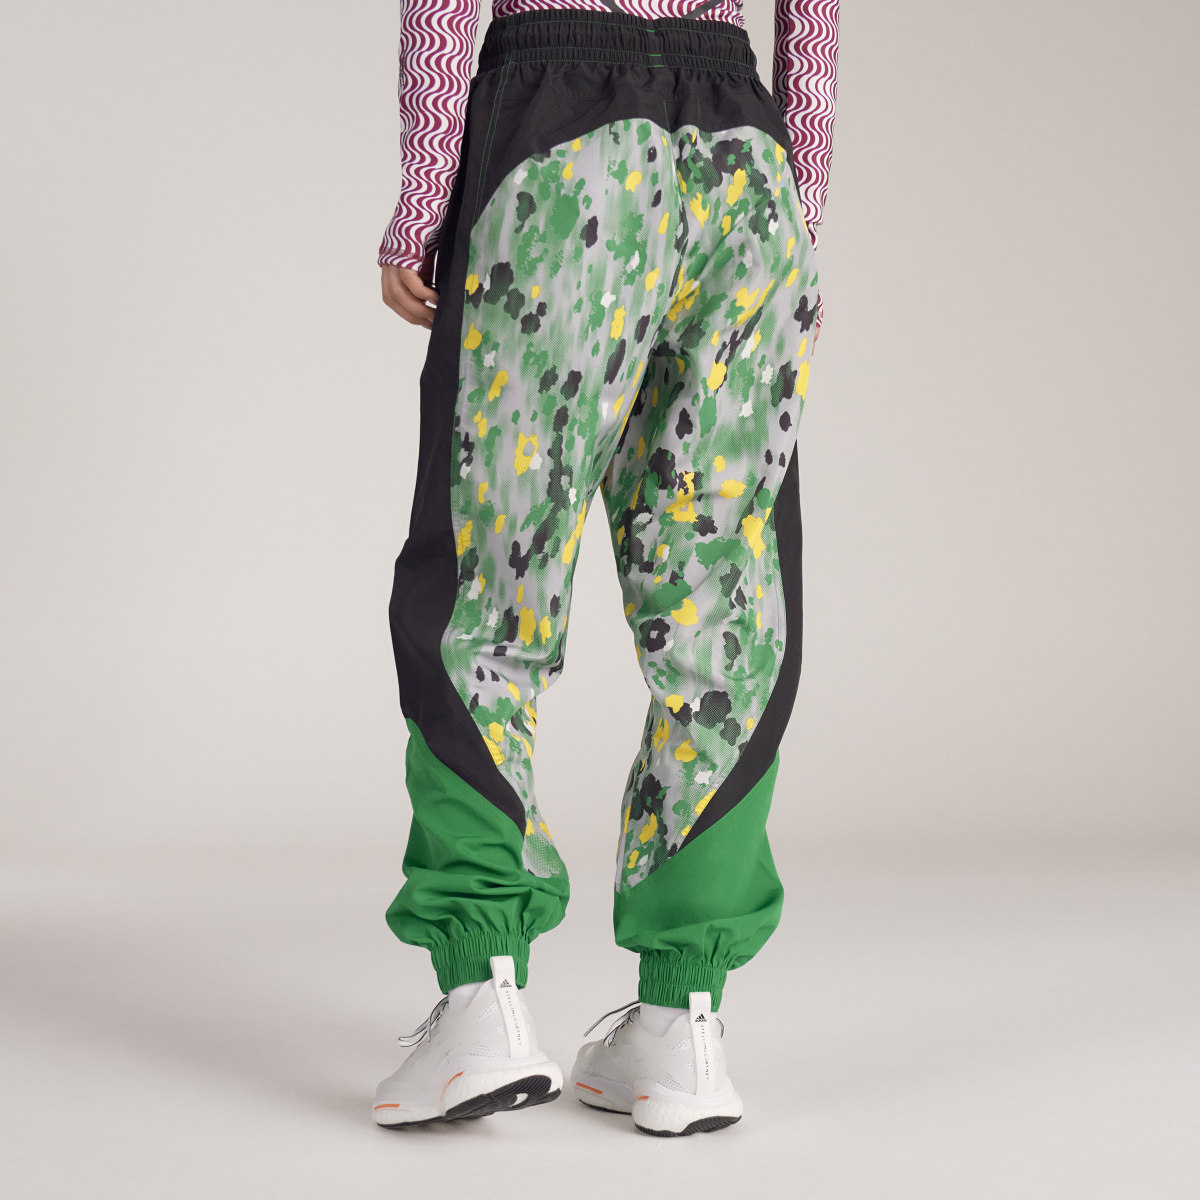 Adidas by Stella McCartney Printed Woven Tracksuit Bottoms. 11